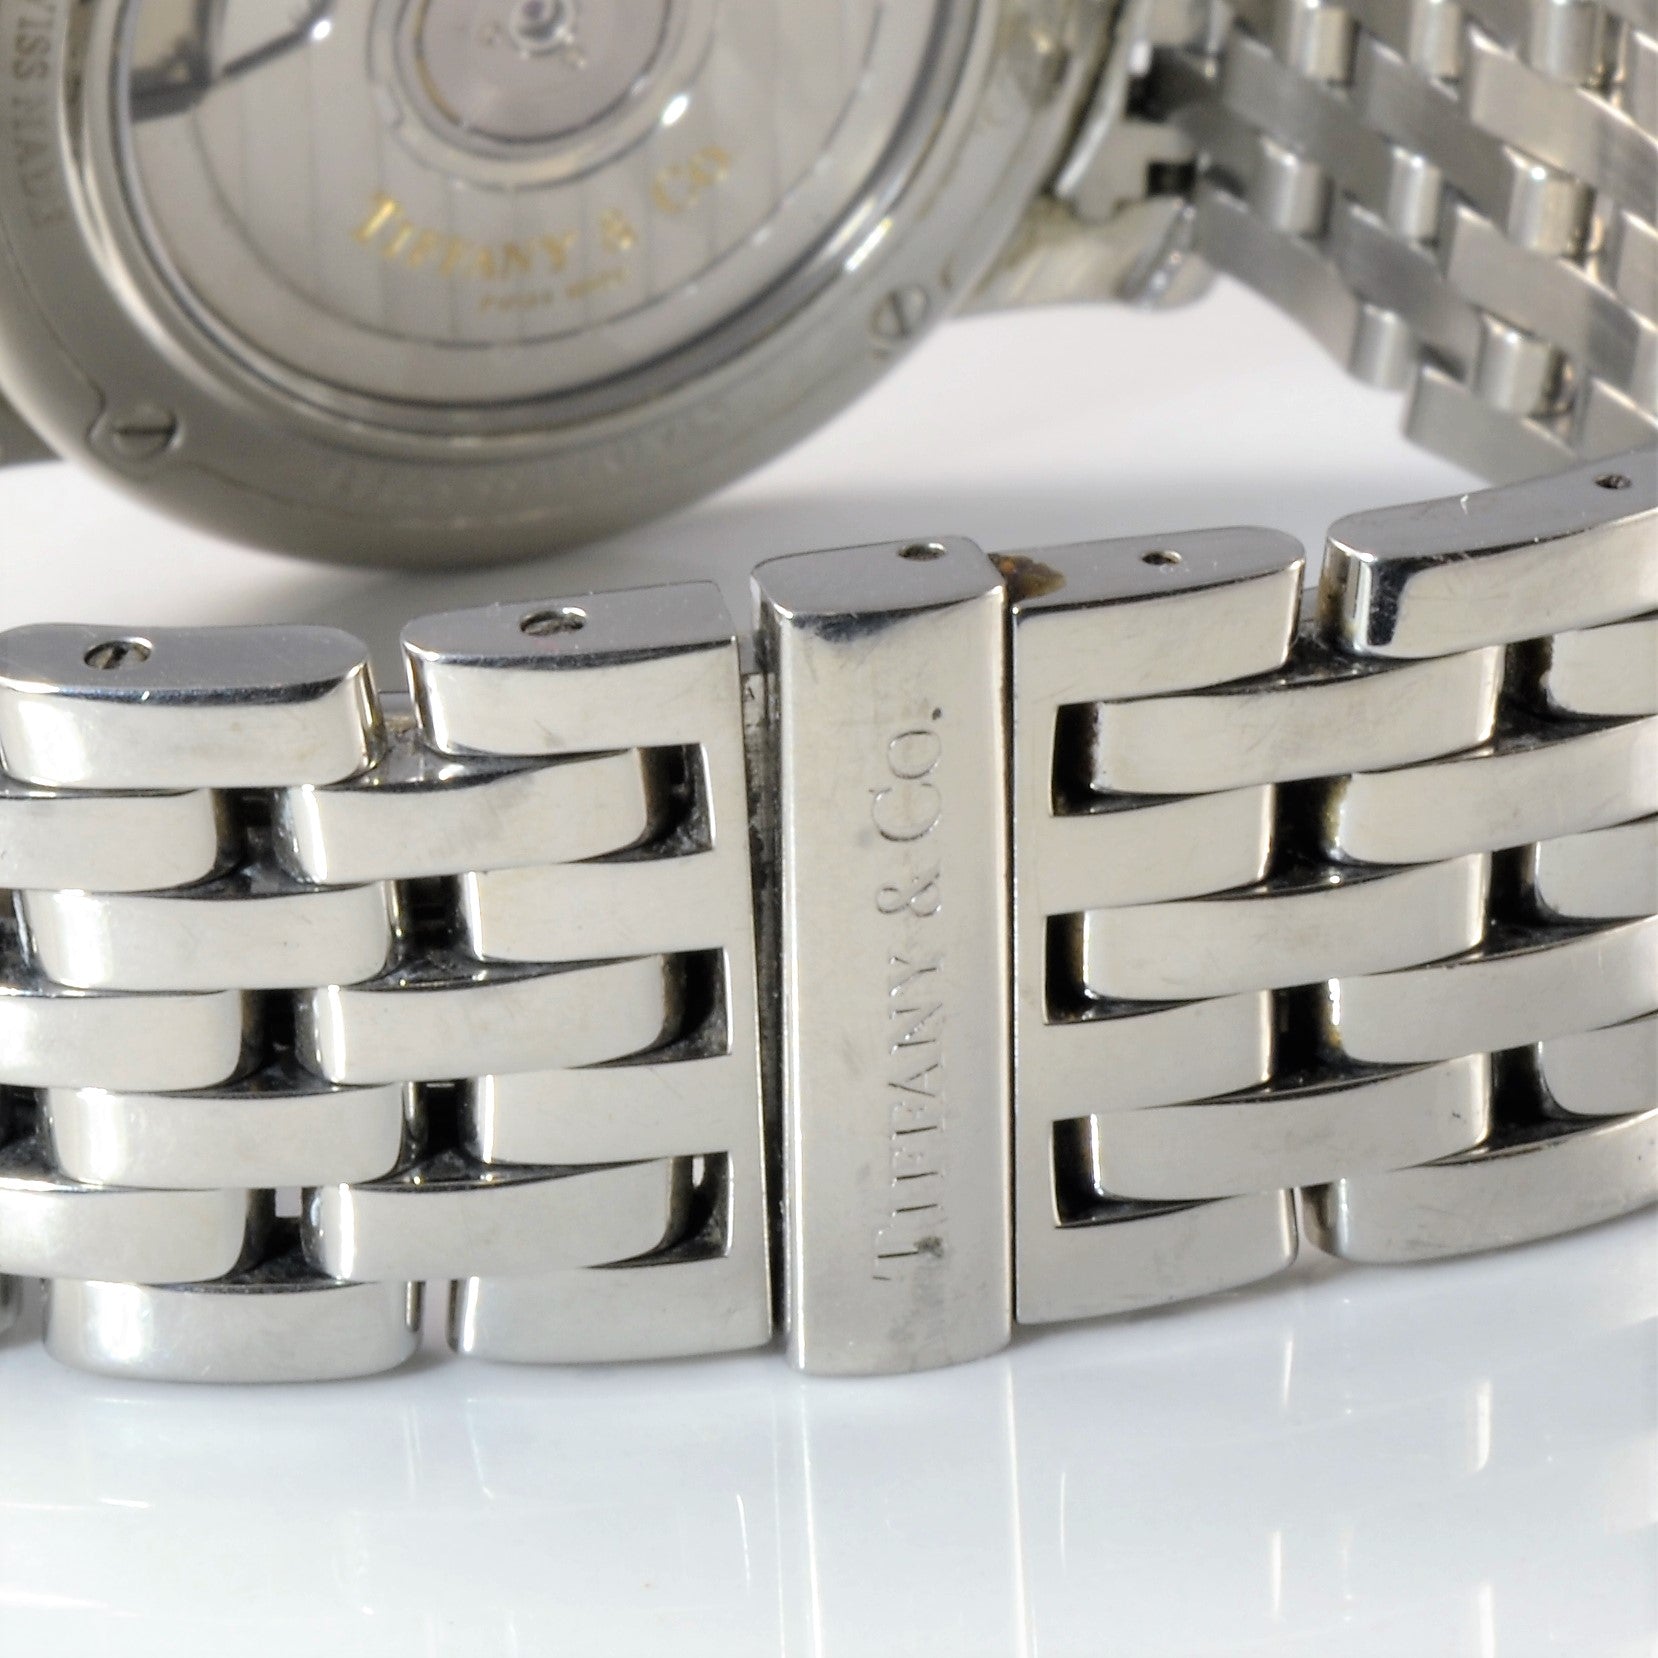 Tiffany & Co.' Stainless Steel Watch